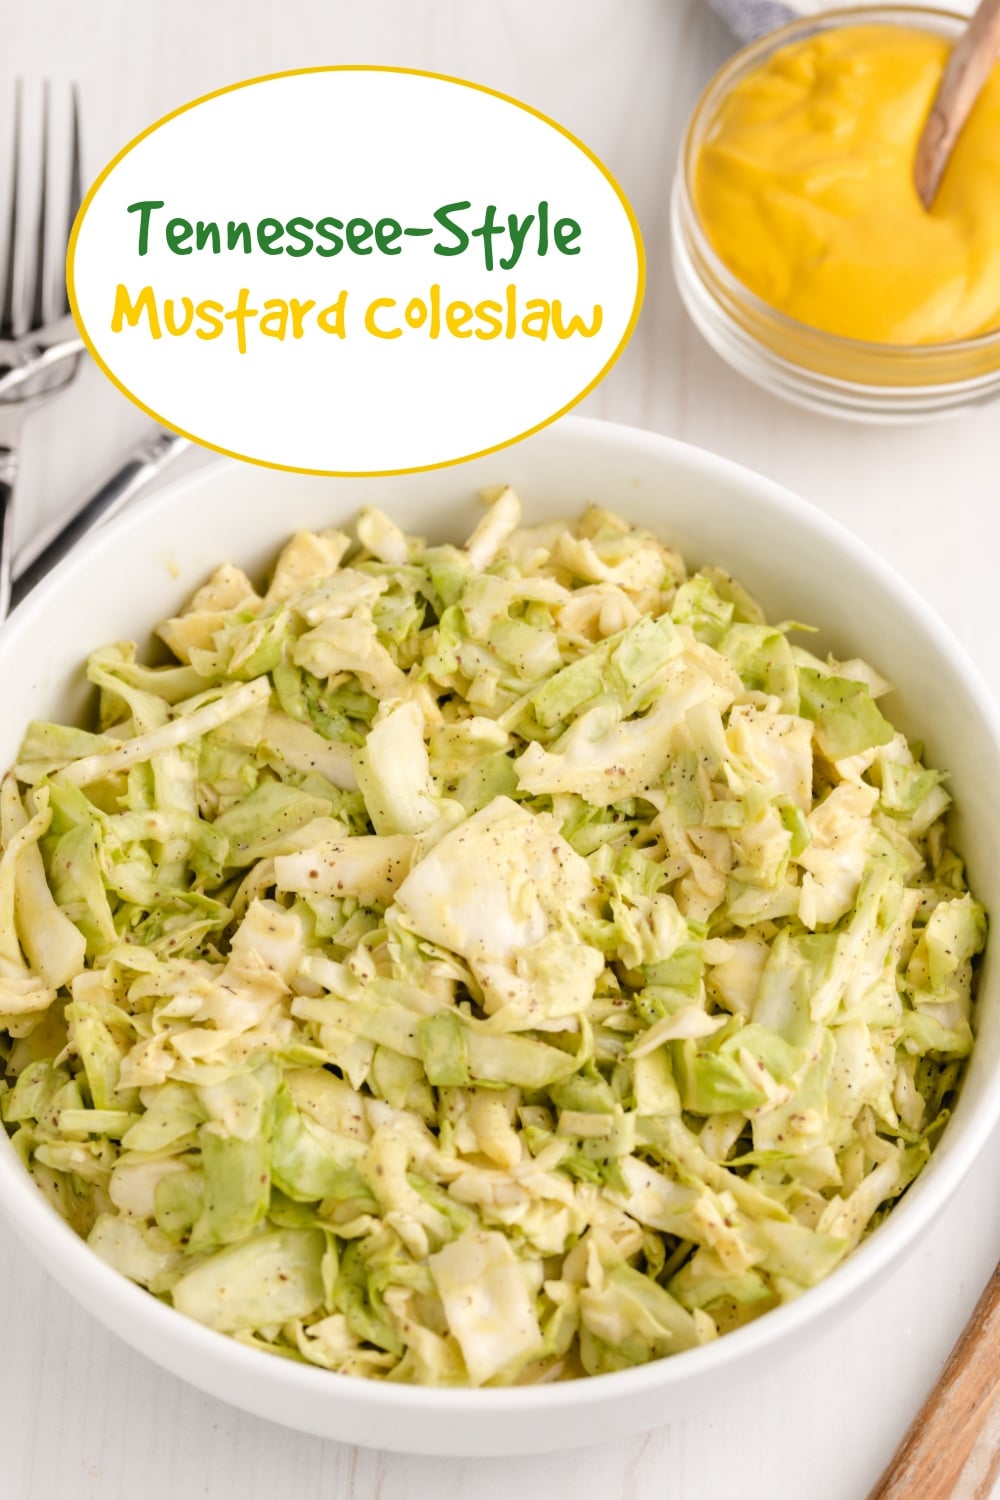 This Tennessee-Style Mustard Coleslaw is a classic mayonnaise-based coleslaw bolstered with the addition of yellow mustard. This traditionally, southern version of coleslaw is a versatile side dish that can do double duty as a burger or hot dog topper, too. via @cmpollak1